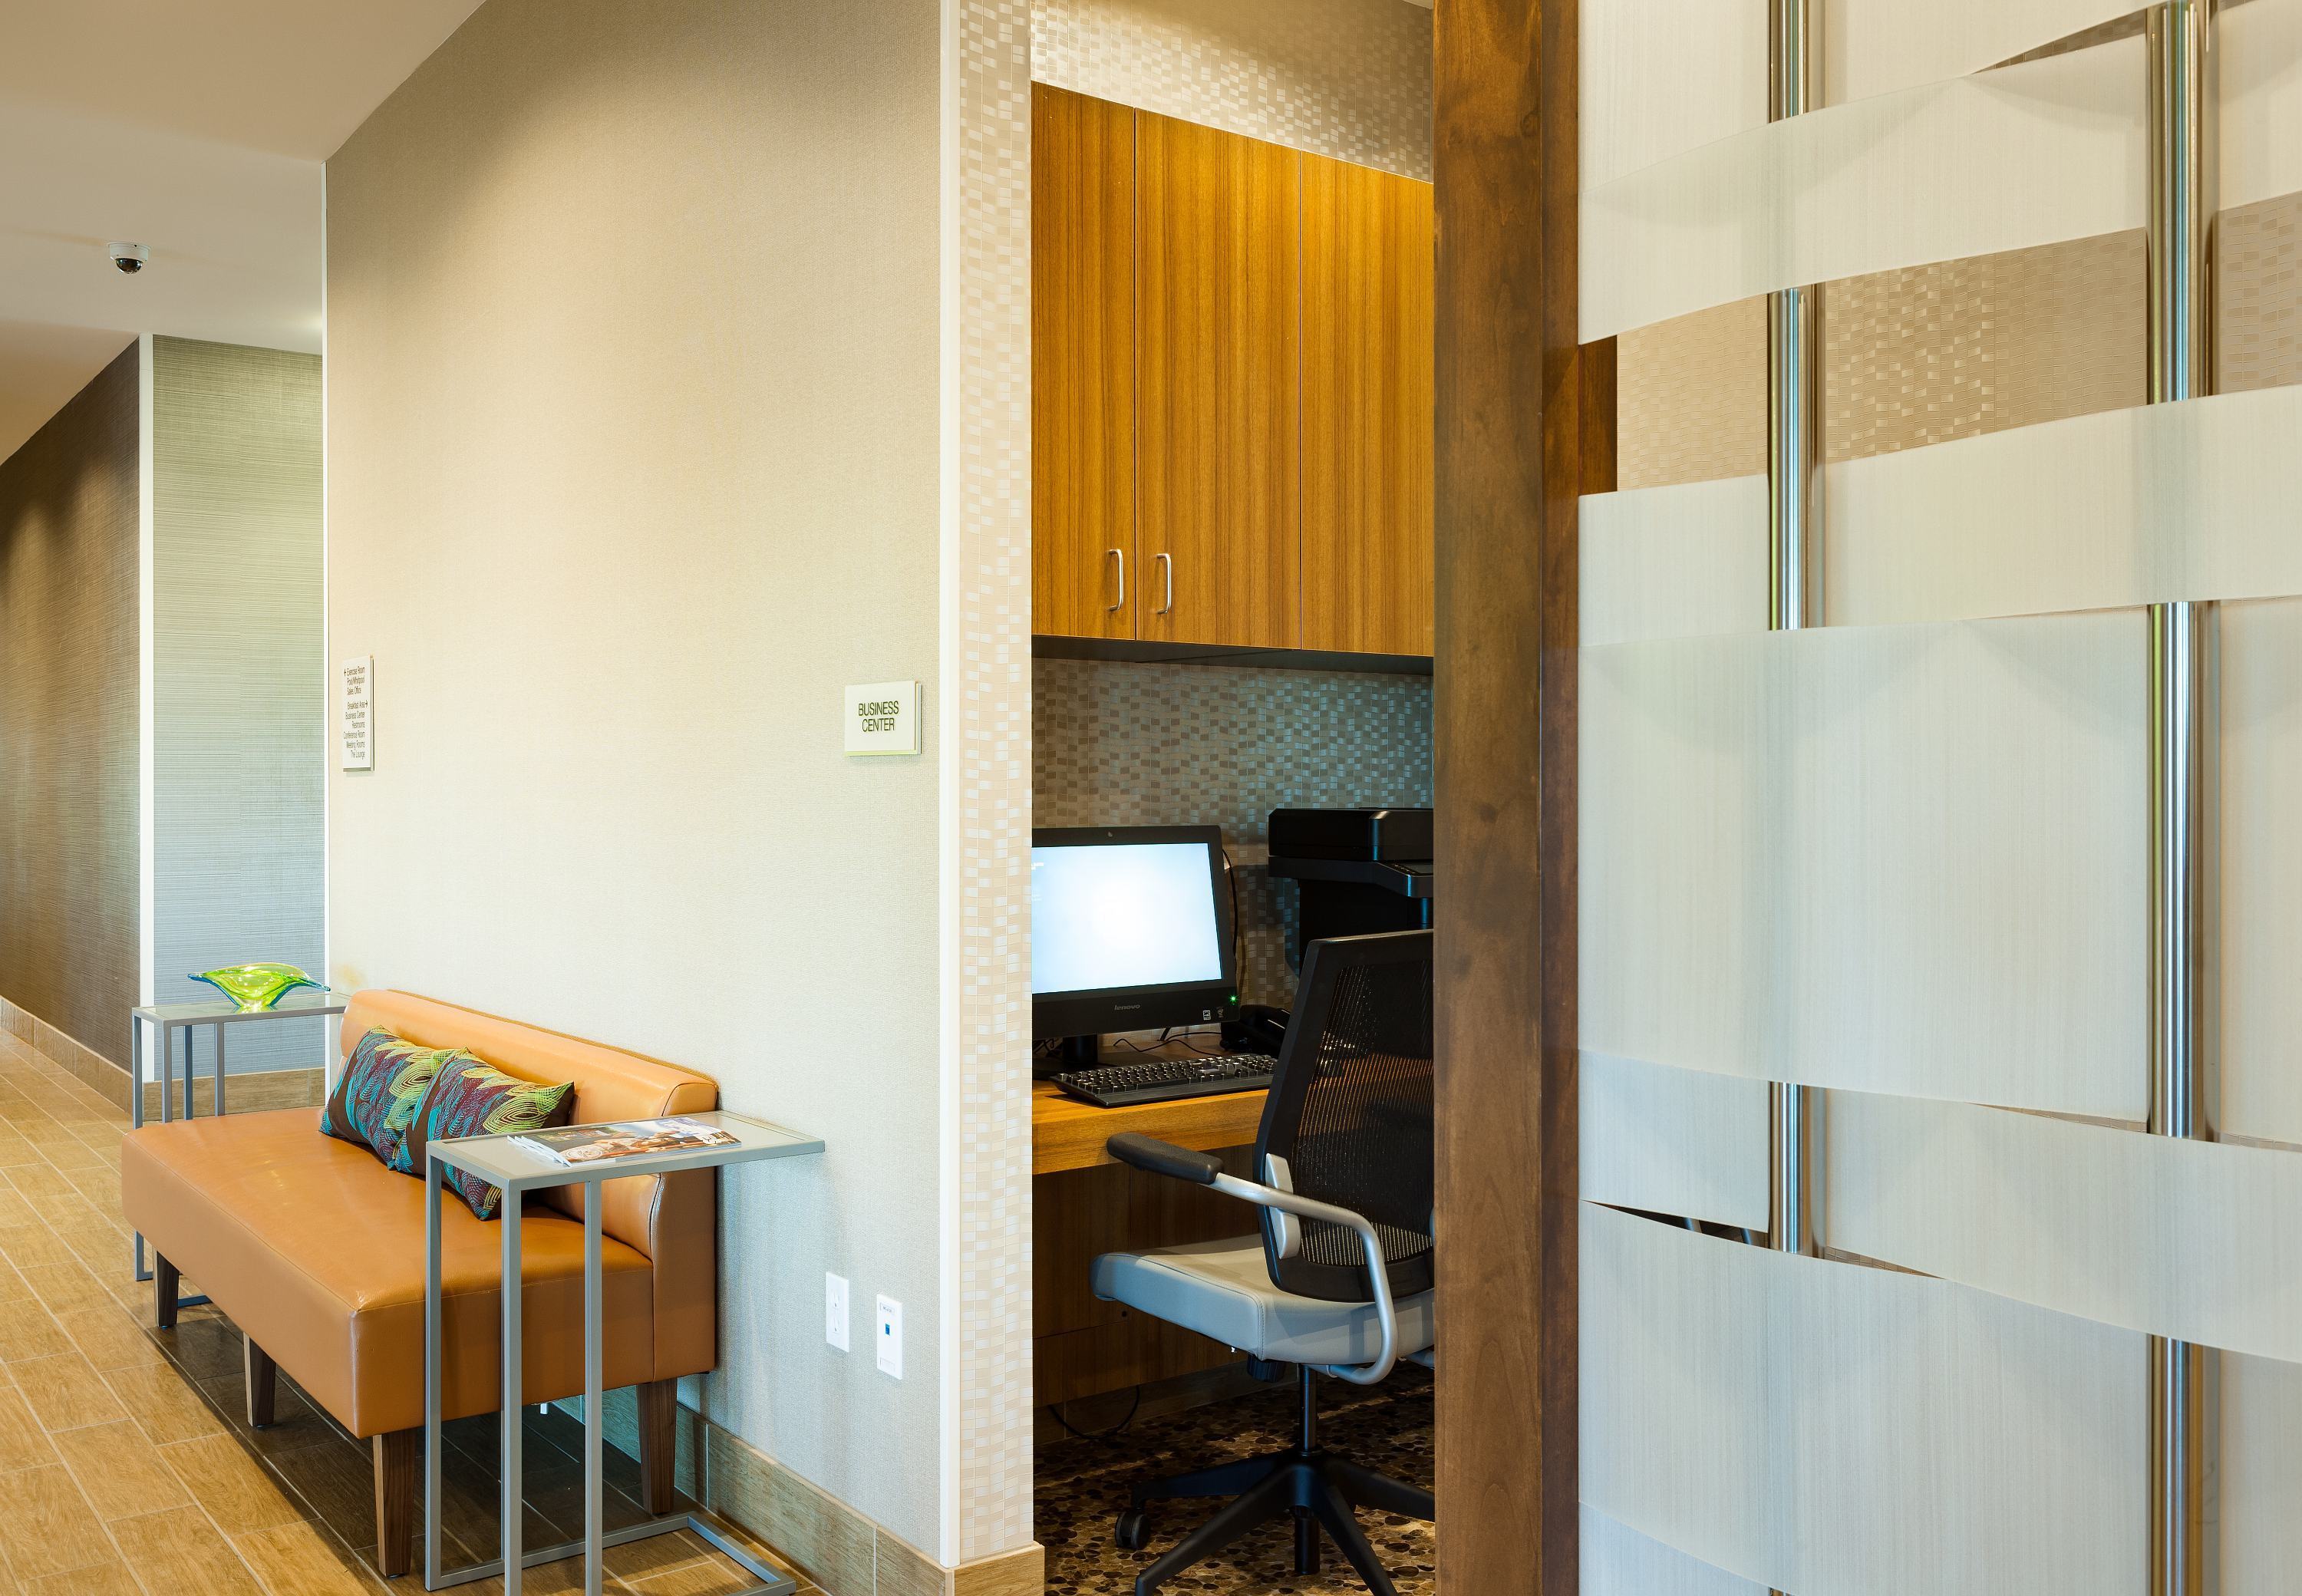 Photo of SpringHill Suites Kennewick Tri-Cities, Kennewick, WA